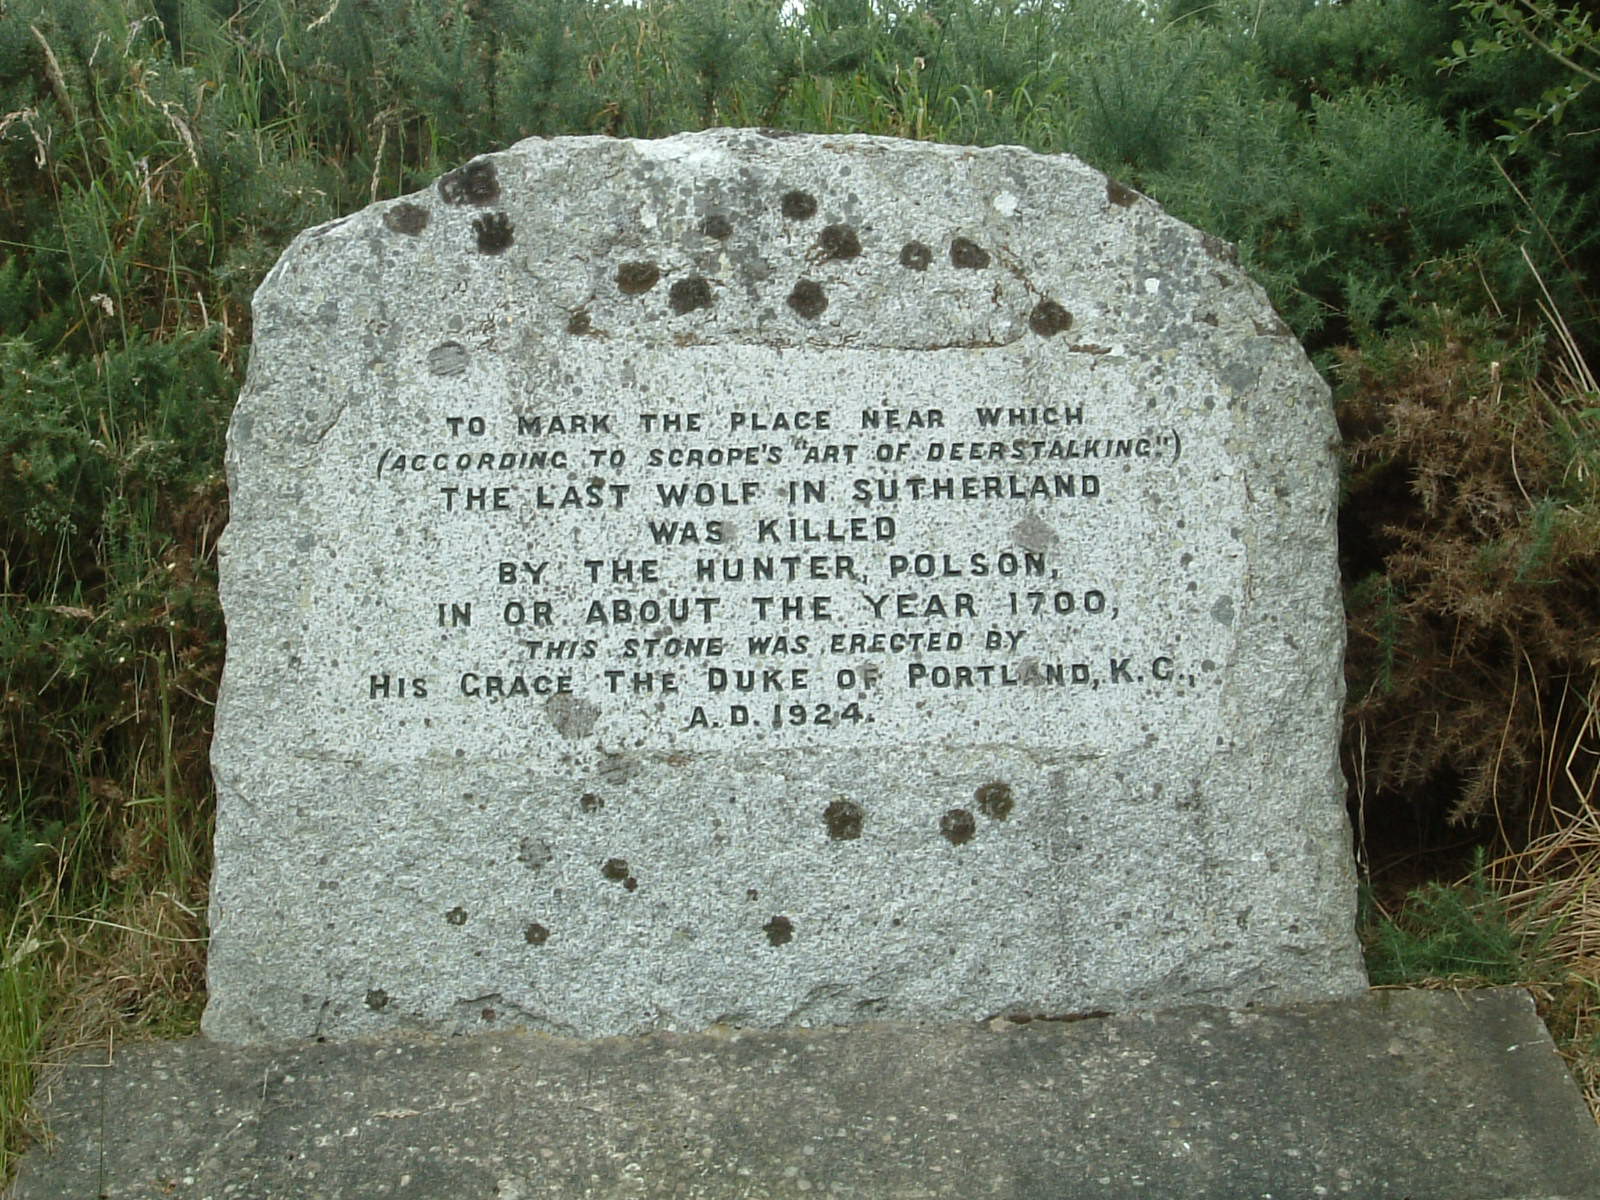 A stone by the A9 marking the spot where the last wolf in Sutherland was killed around the year 1700